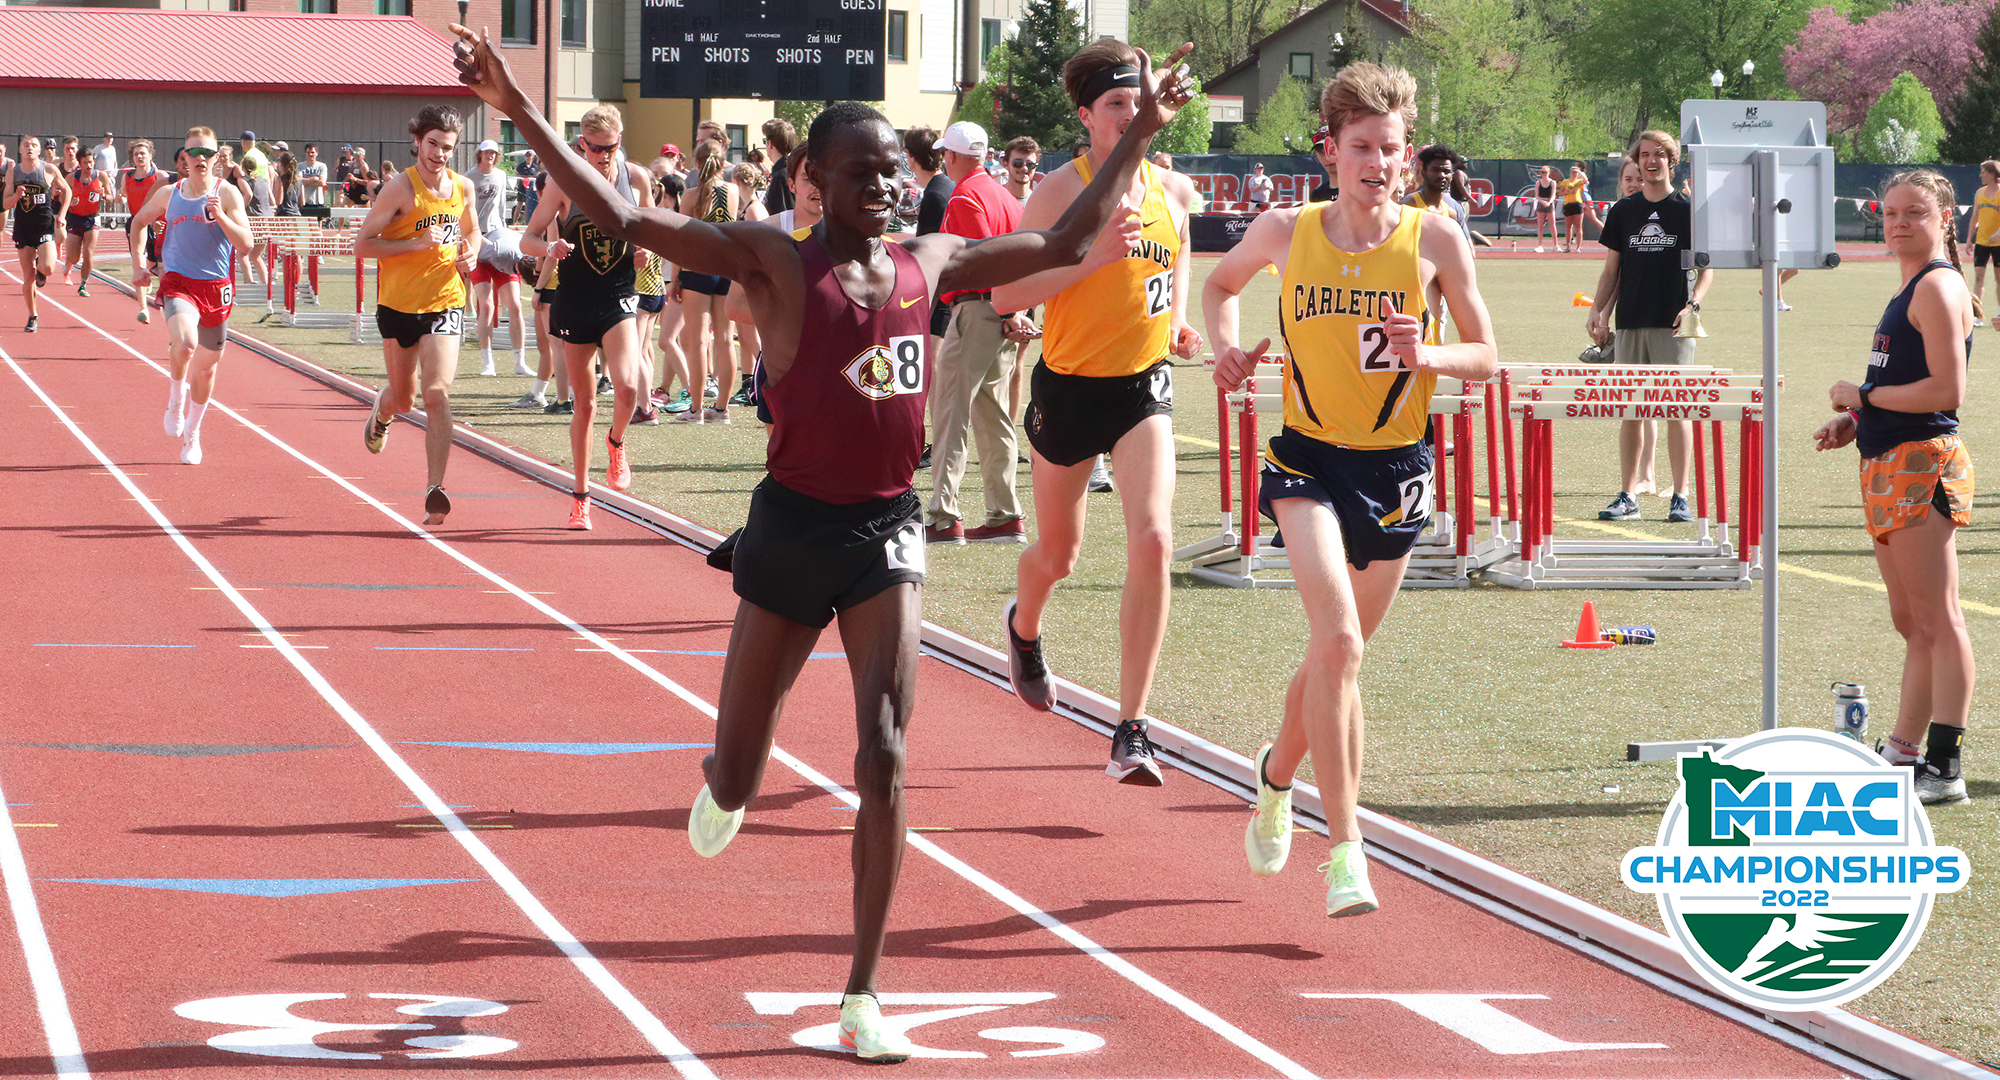 Munir Isahak raises his hands in victory after winning the 5K at the MIAC Outdoor Meet. He also won the 1500M. (Photo courtesy of St. Mary's SID)